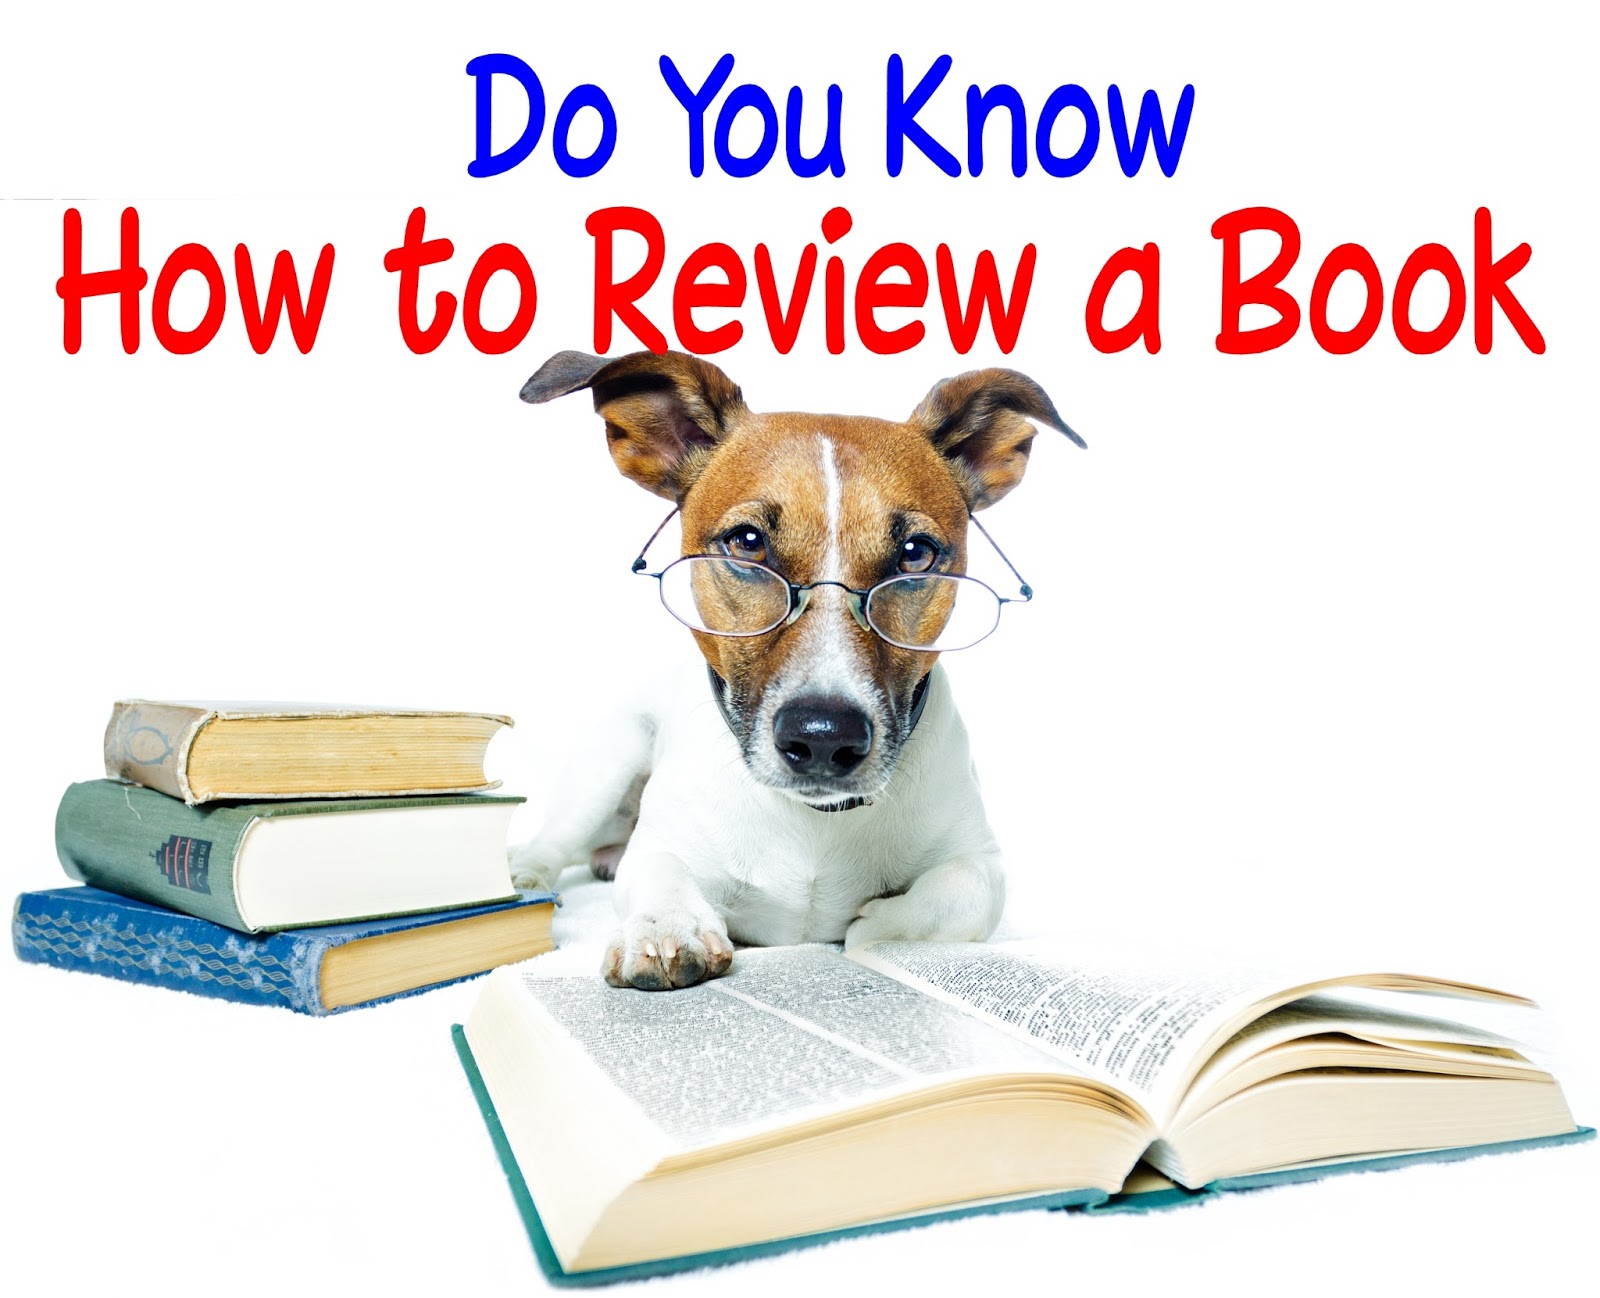 How to Write a Scientific Book Review